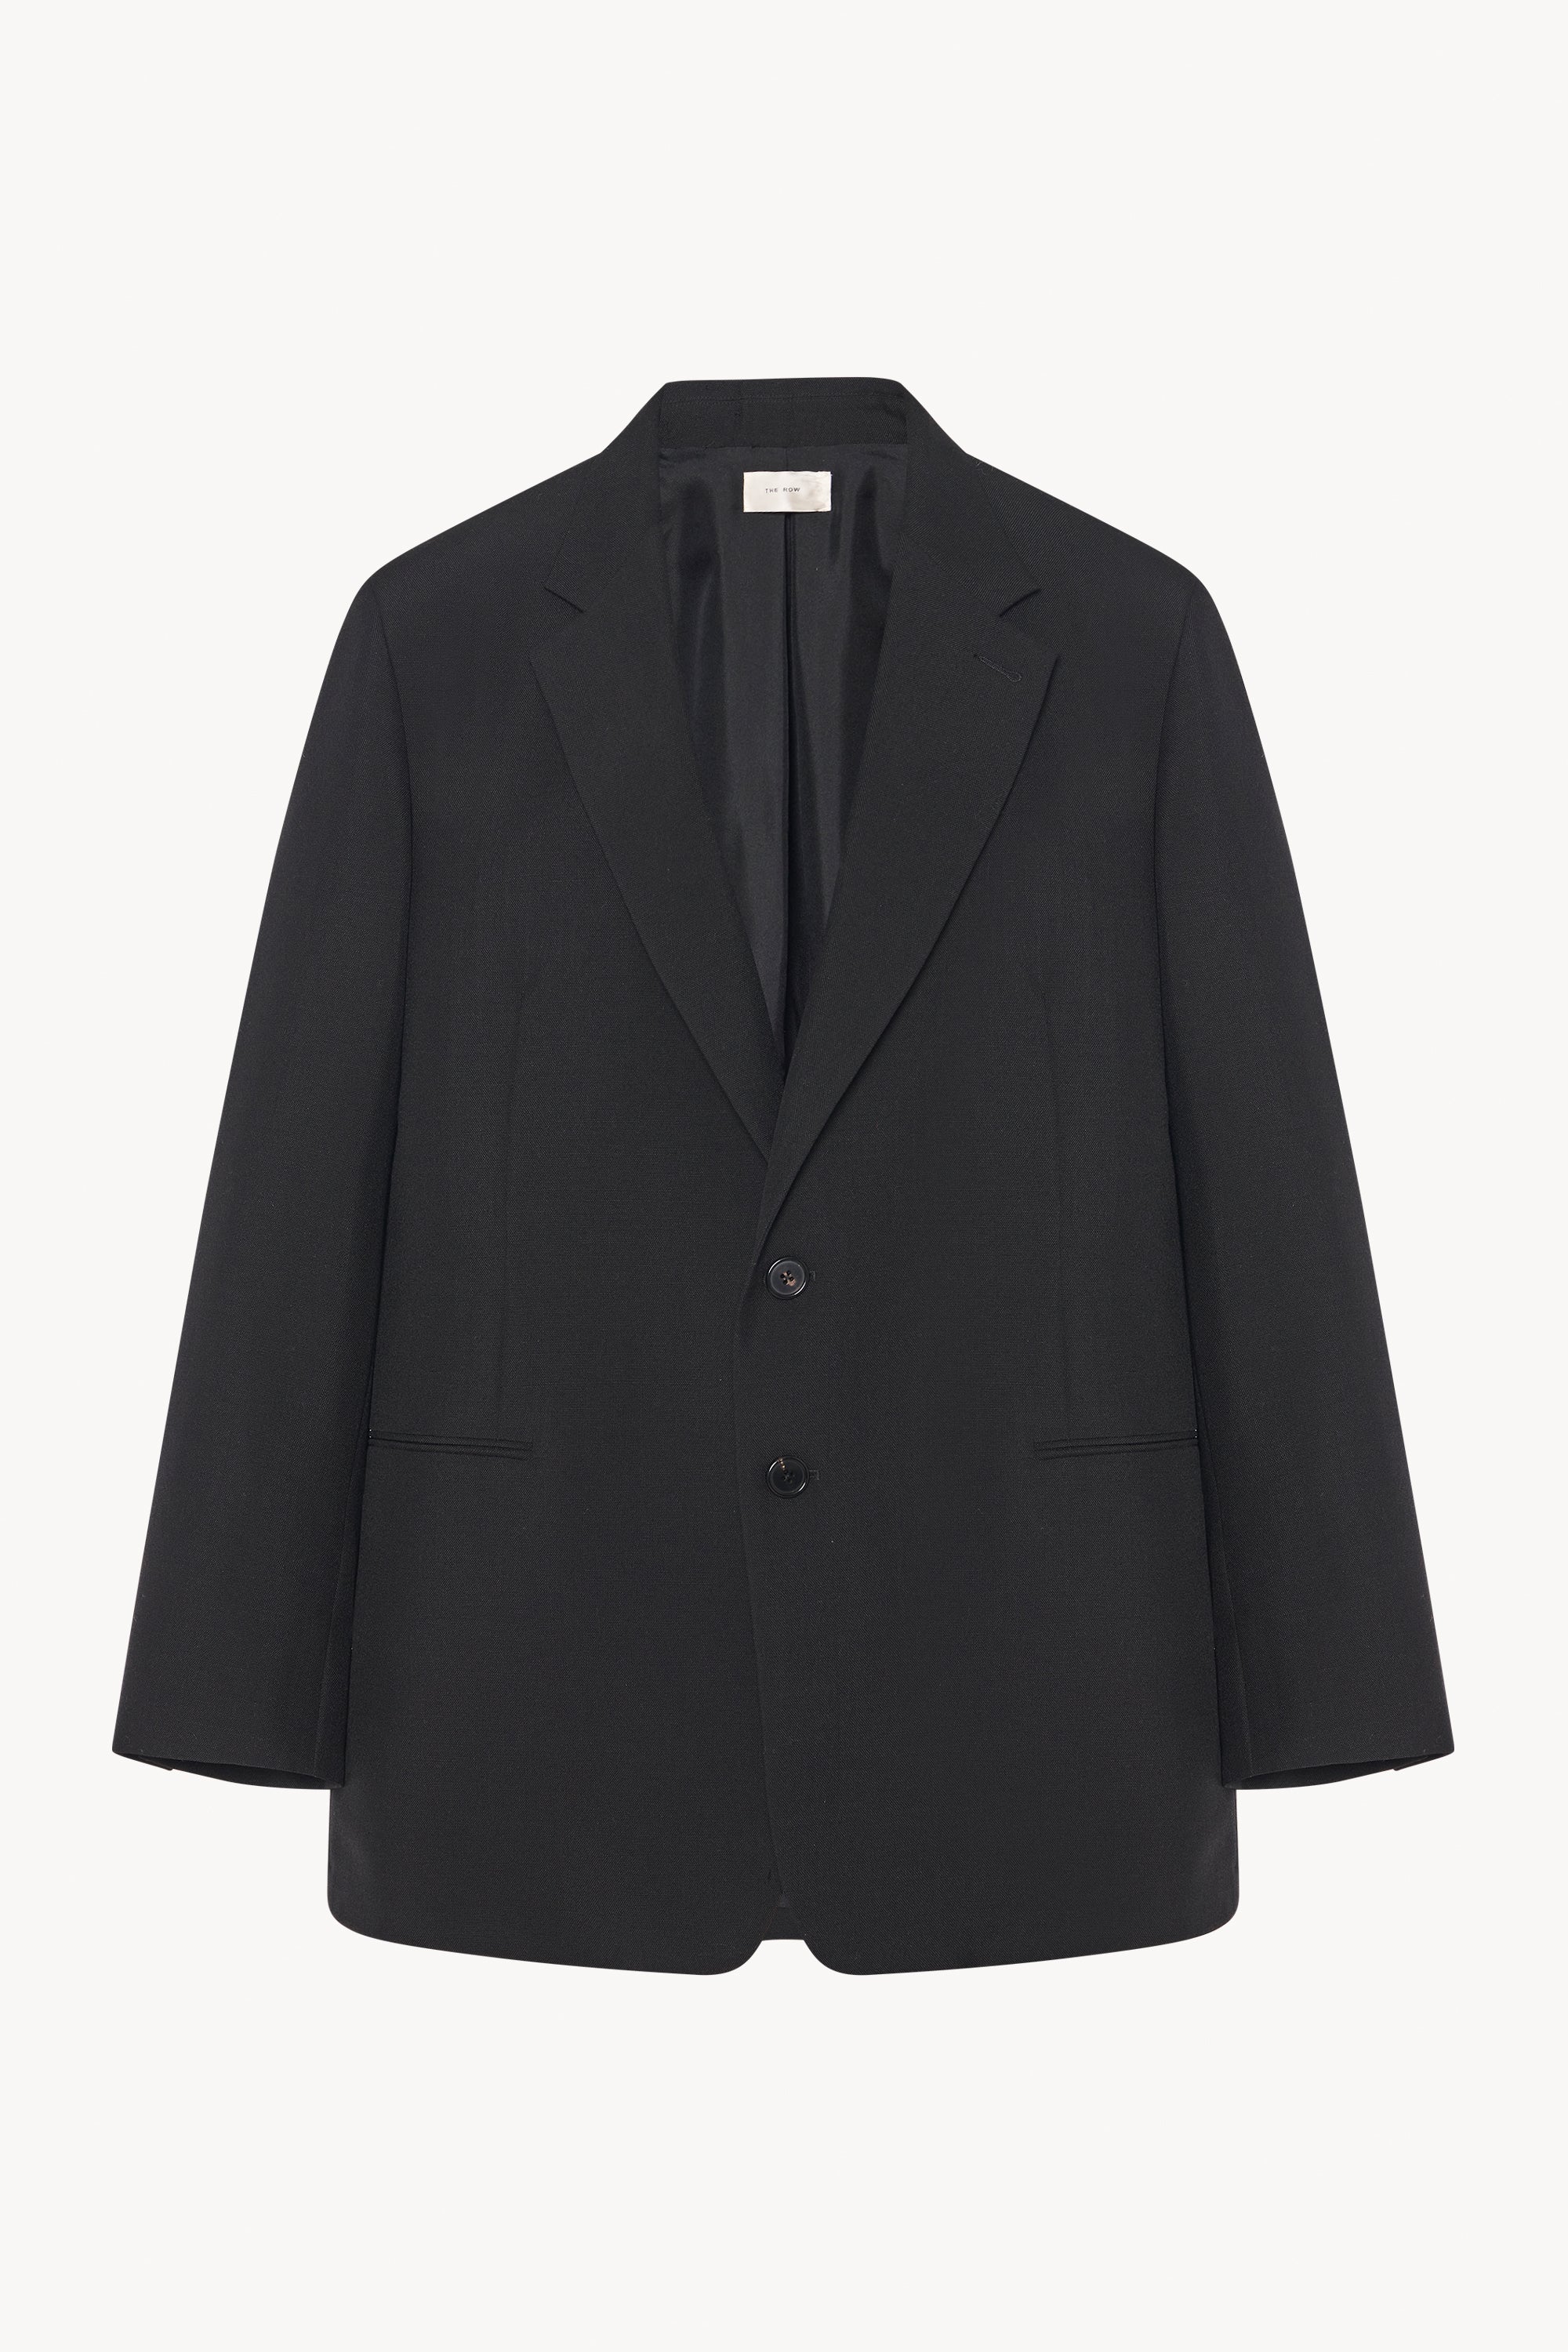 Clotho Jacket Black in Virgin Wool and Mohair – The Row